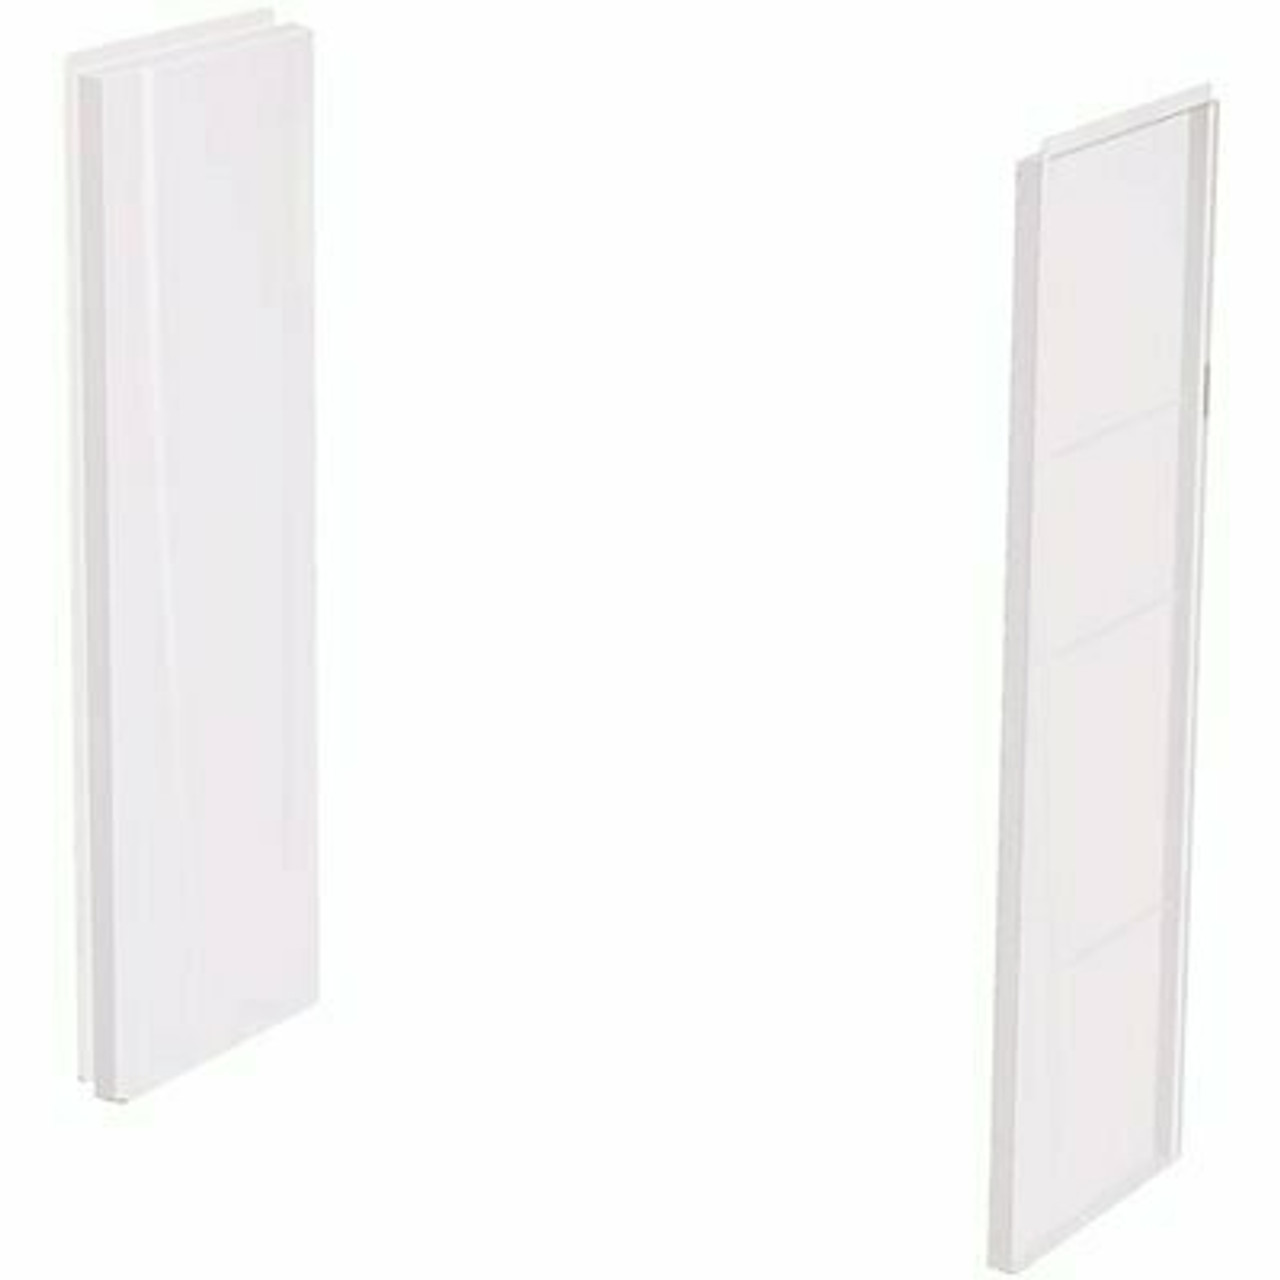 Aquatic A2 8 In. X 24 In. X 62 In. 2-Piece Direct-To-Stud Shower Wall Panels In White